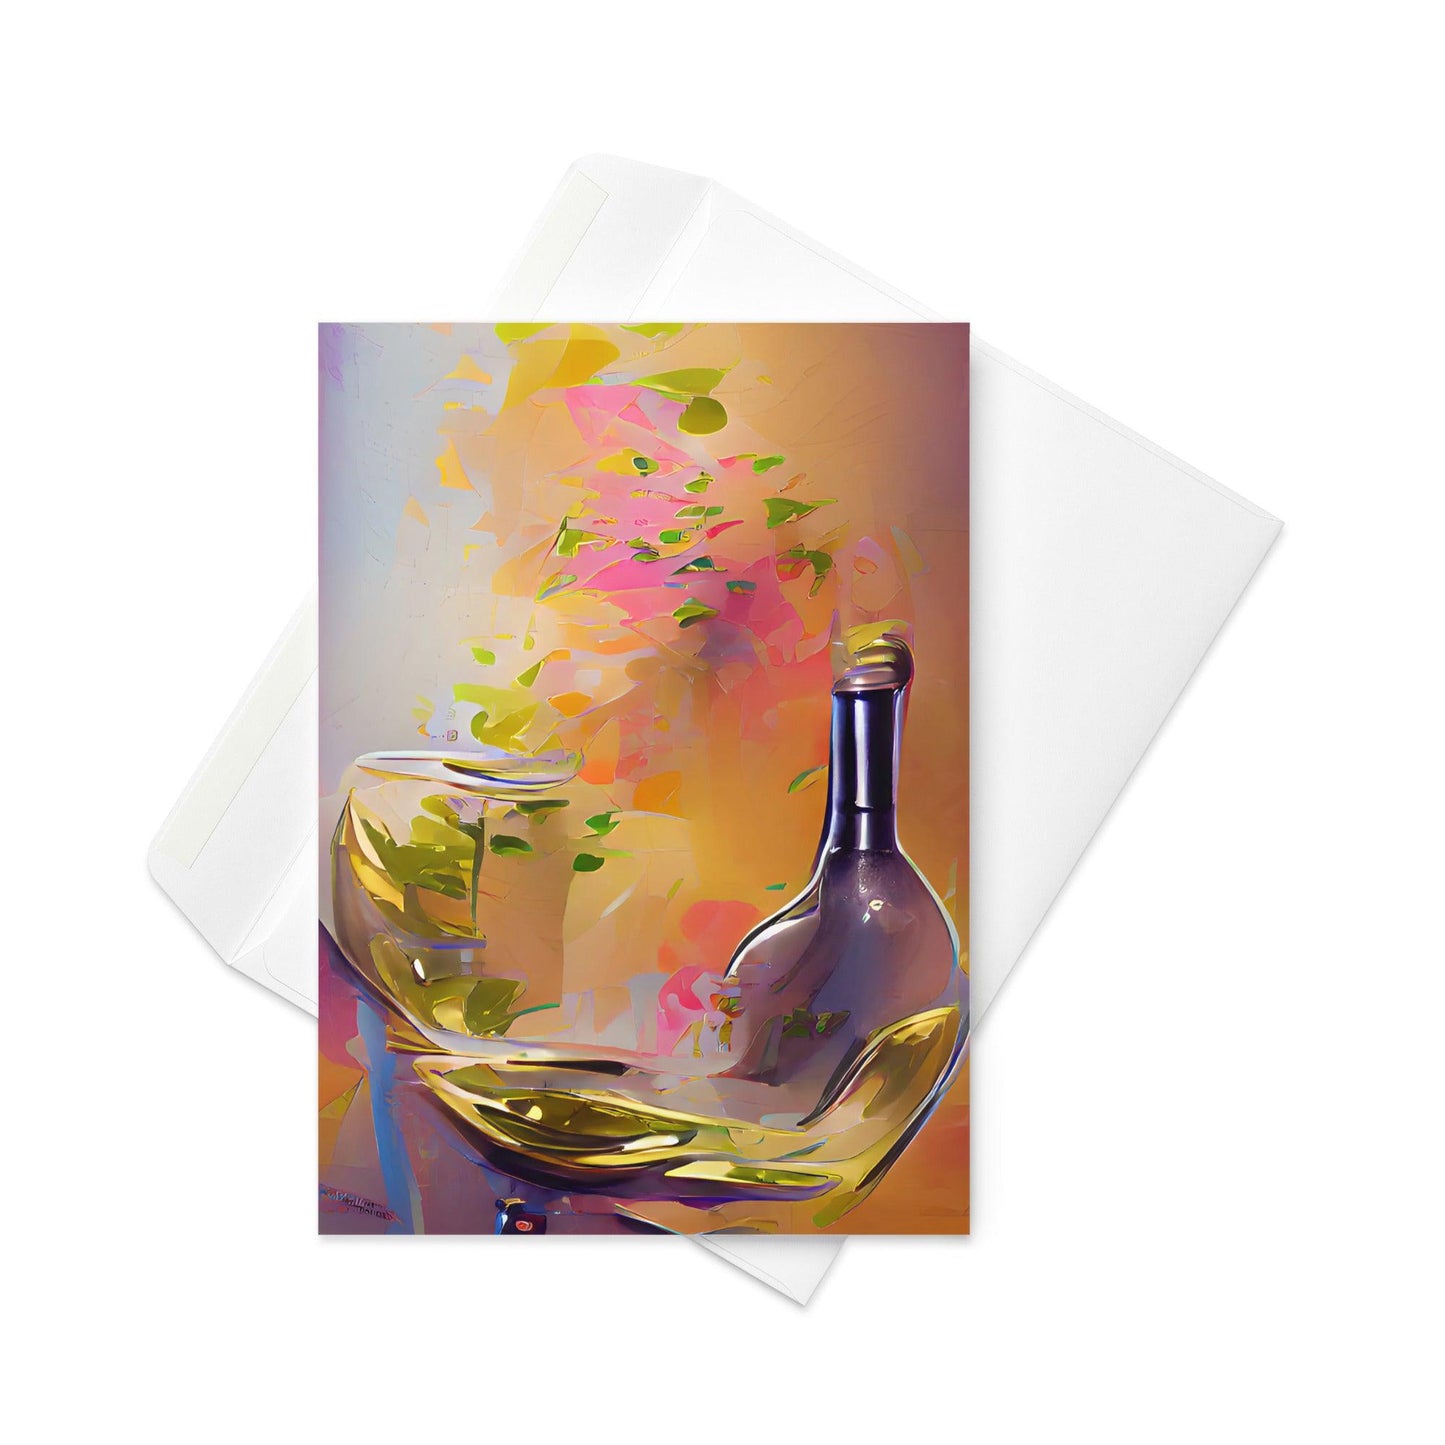 Wine Flies When You’re Having Fun - Note Card - iSAW Company